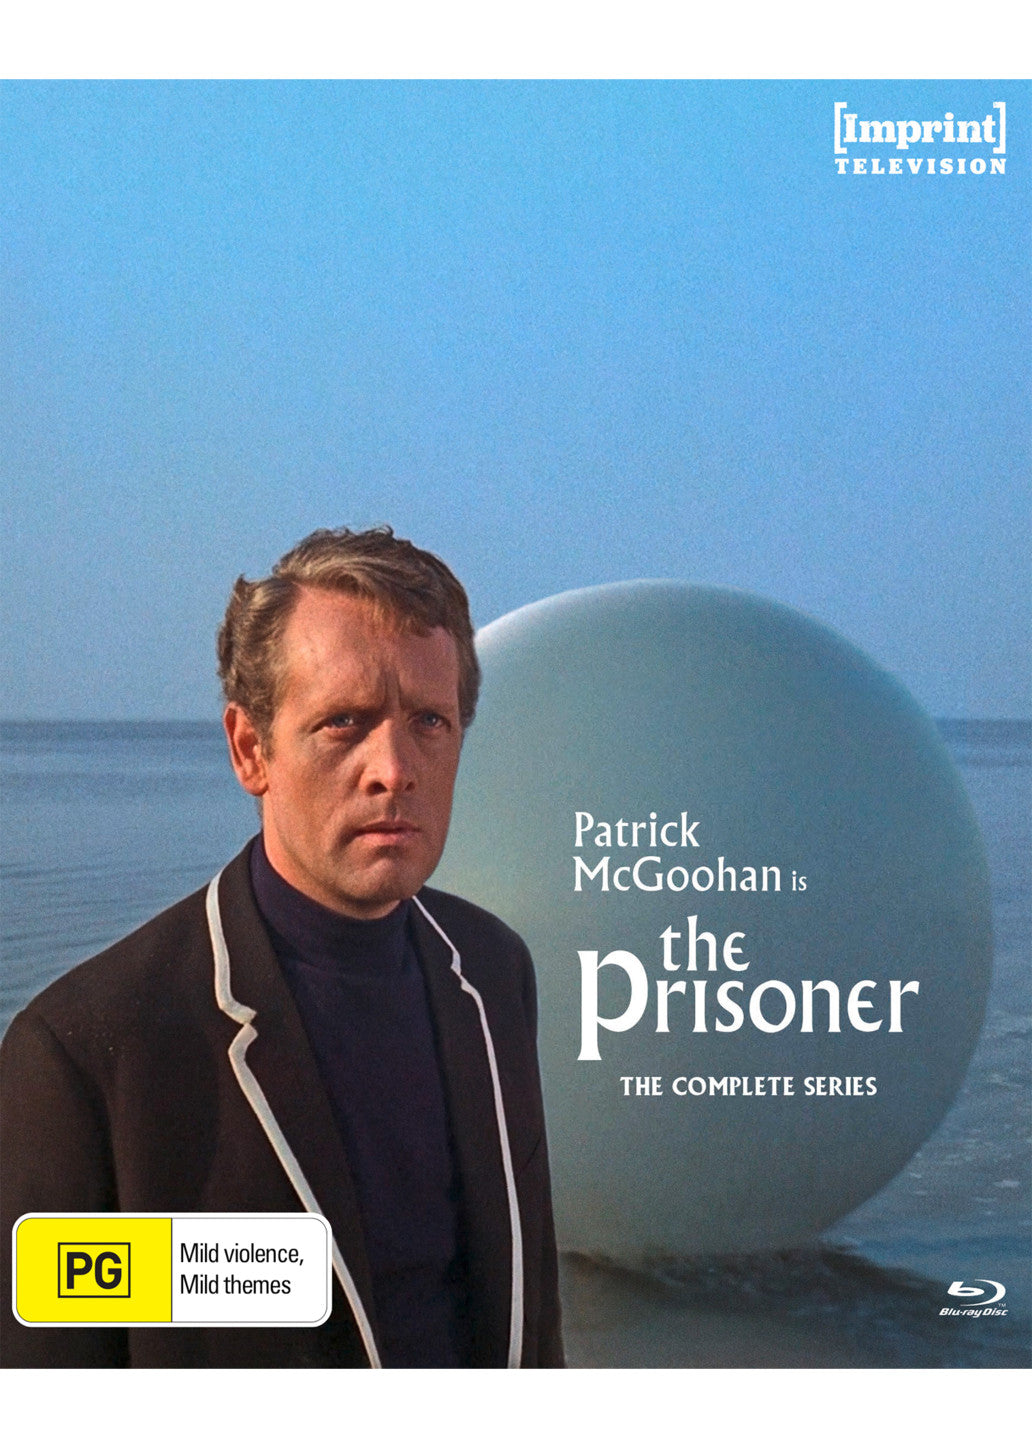 THE PRISONER: THE COMPLETE SERIES (IMPRINT TV COLLECTION #6) - BLU-RAY